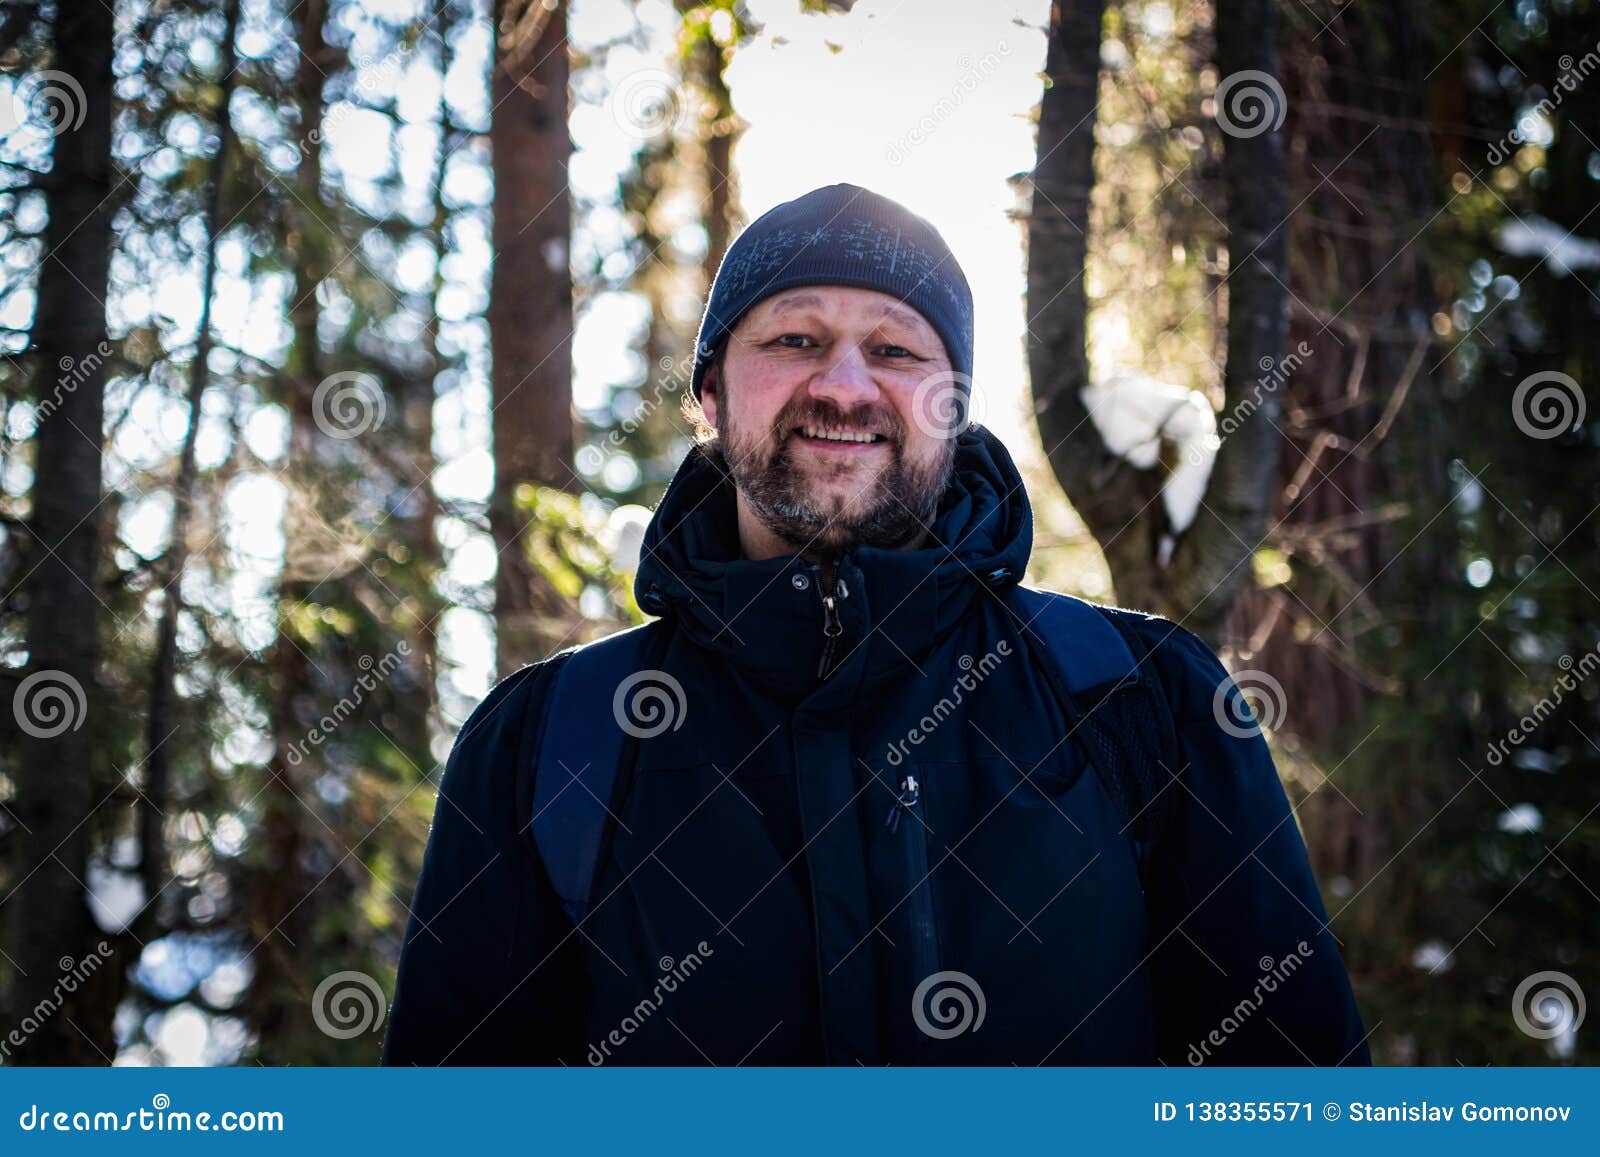 A Young Bearded Man Walks through the Forest and Smiles Looking at You ...